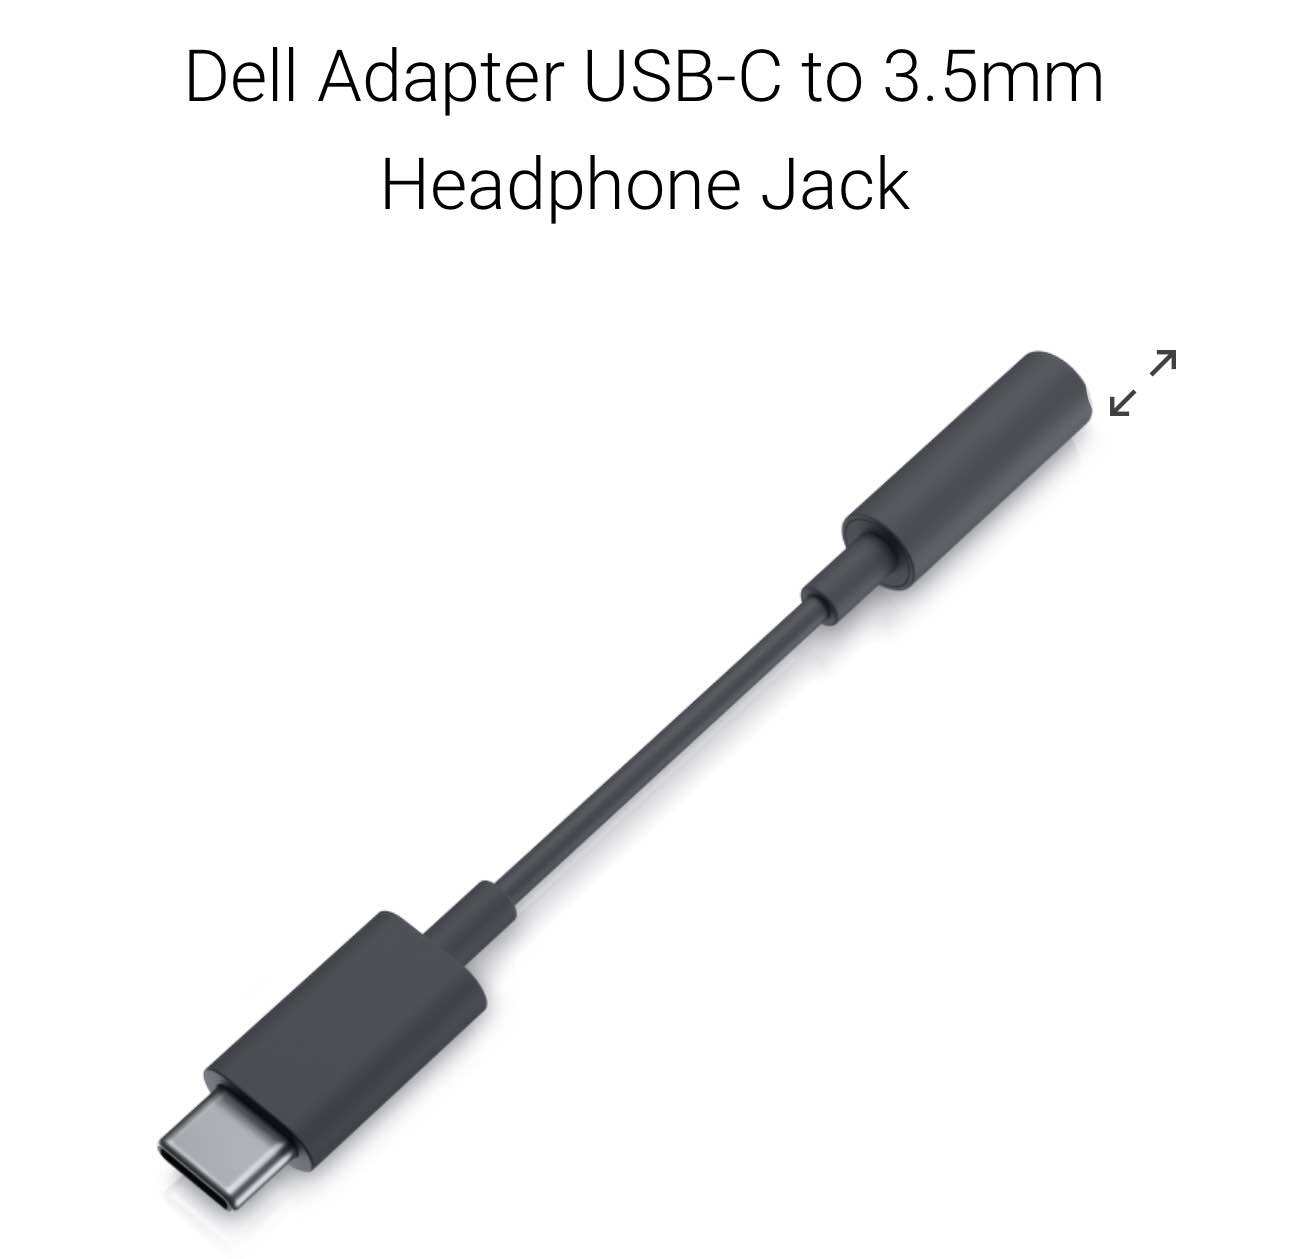 Dell Adapter Usb C to 3.5mm Headphone Jack